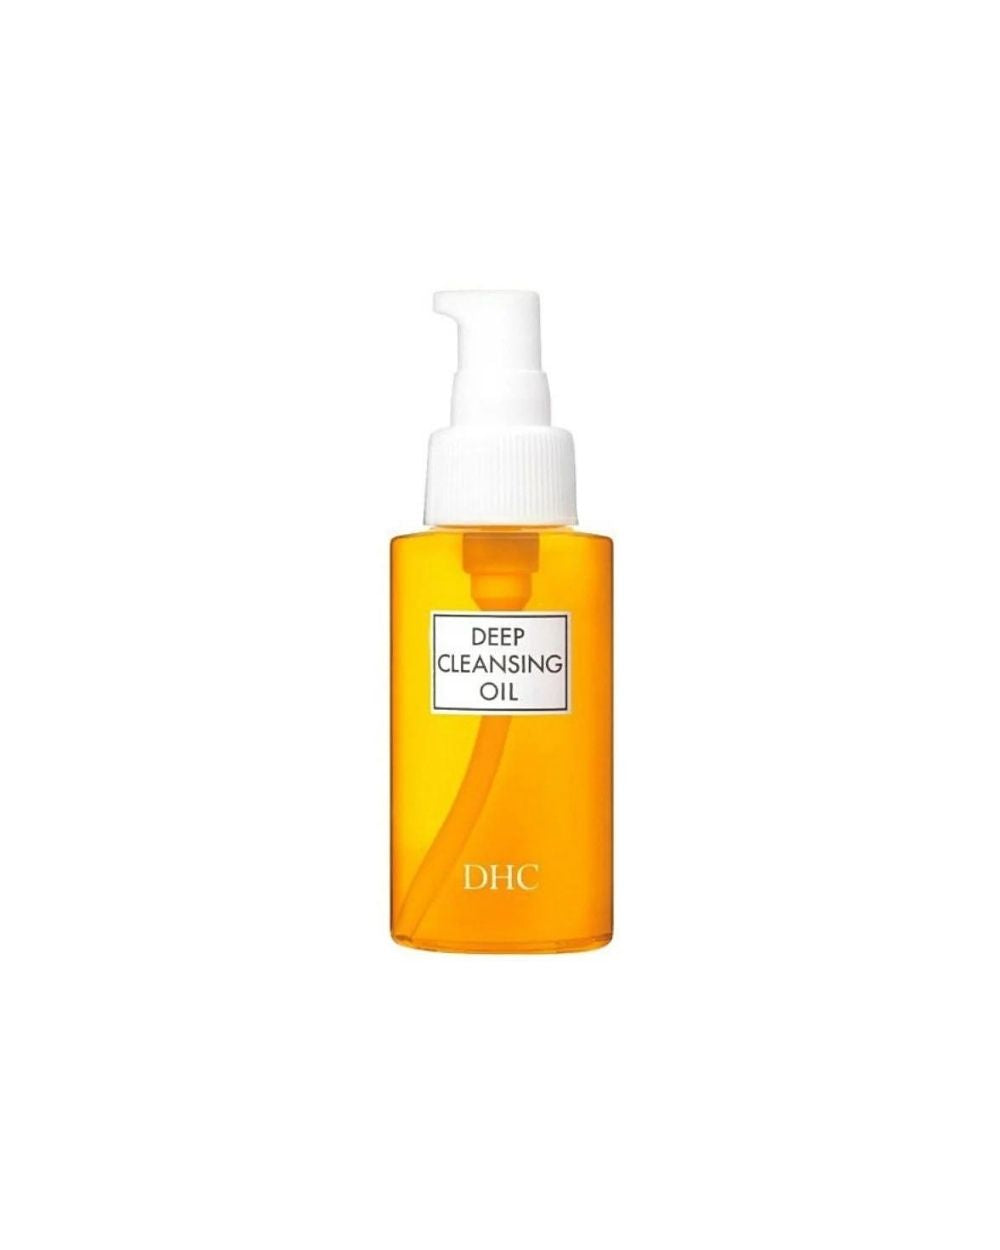 DHC - Deep Cleansing Oil (70 ml)